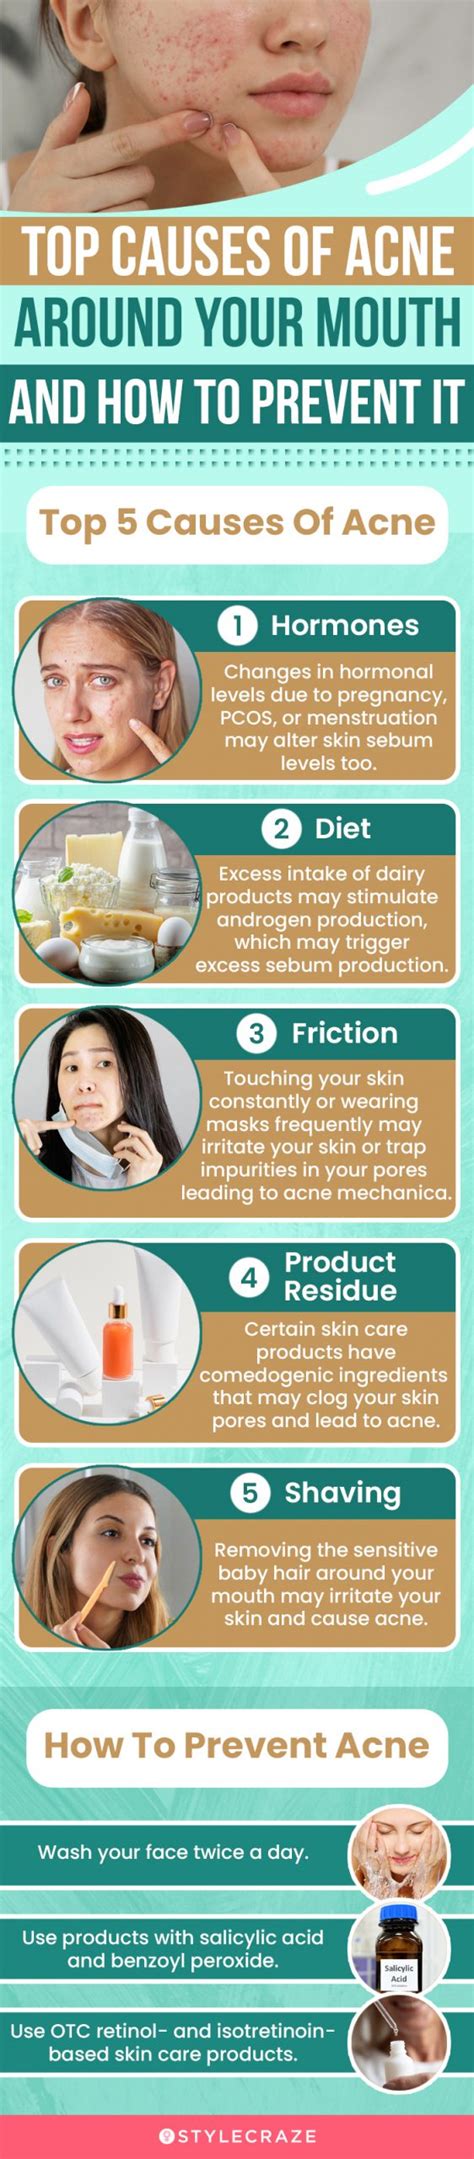 Types Of Acne Around The Mouth And How To Deal With Them